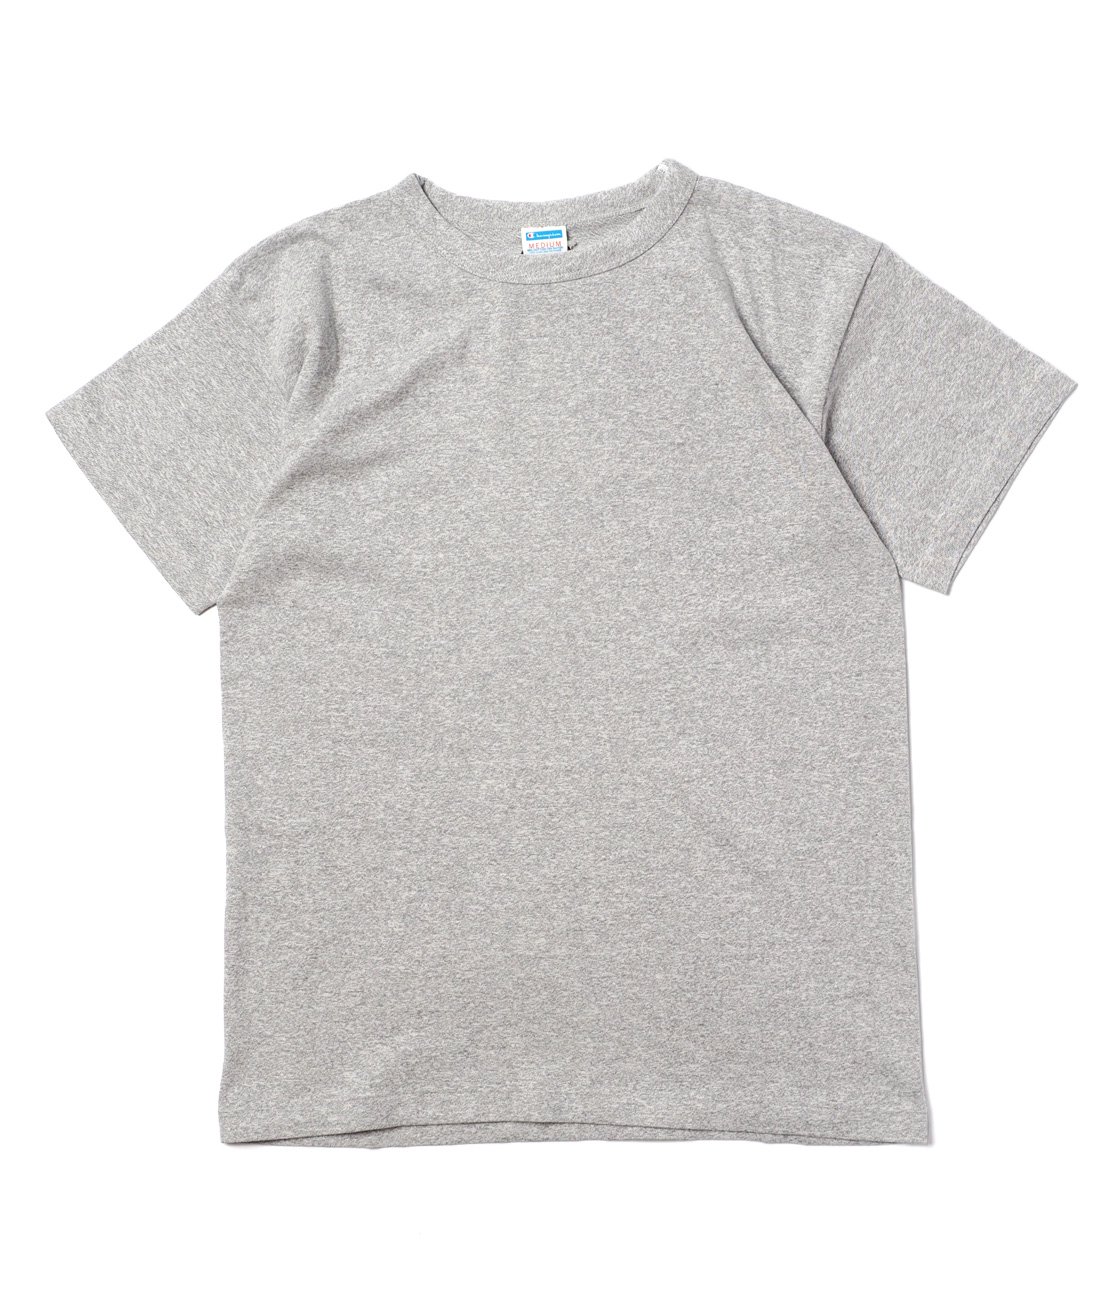 Champion-TRUE TO ARCHIVES】C3-Q302 77QS TEE - OXFORD GREY Tシャツ ...